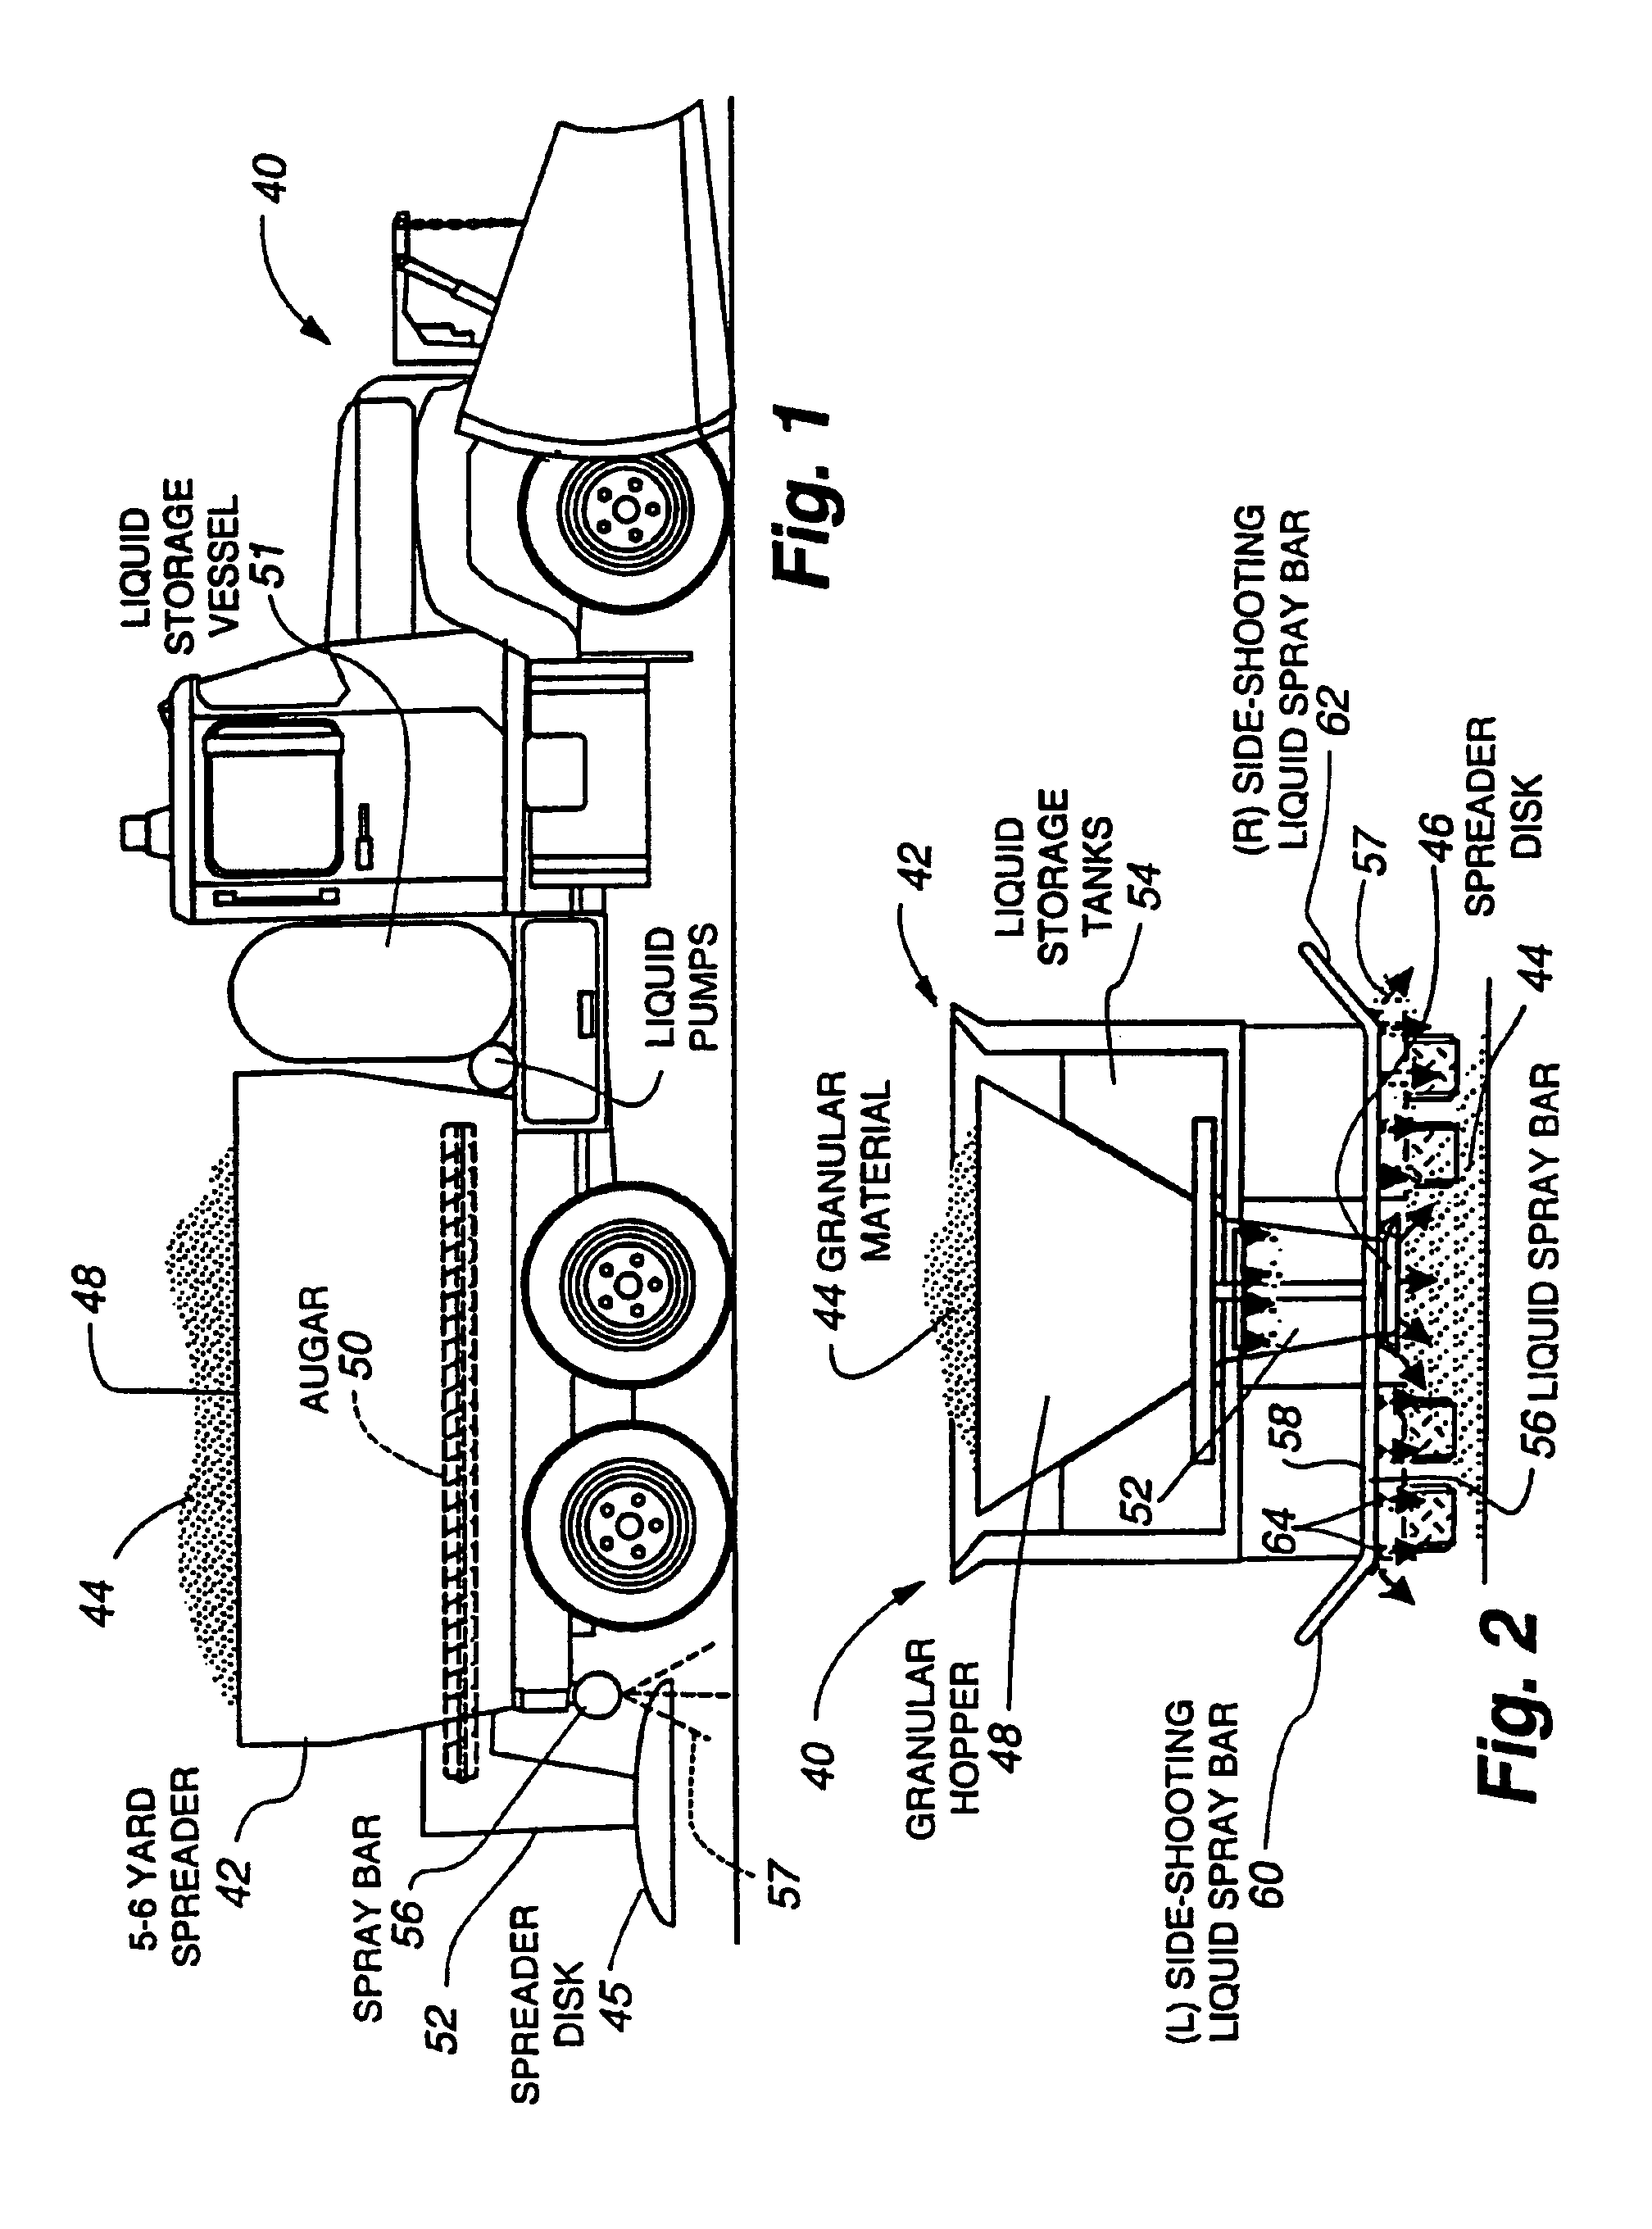 Apparatus and system for synchronized application of one or more materials to a surface from a vehicle and control of a vehicle mounted variable position snow removal device